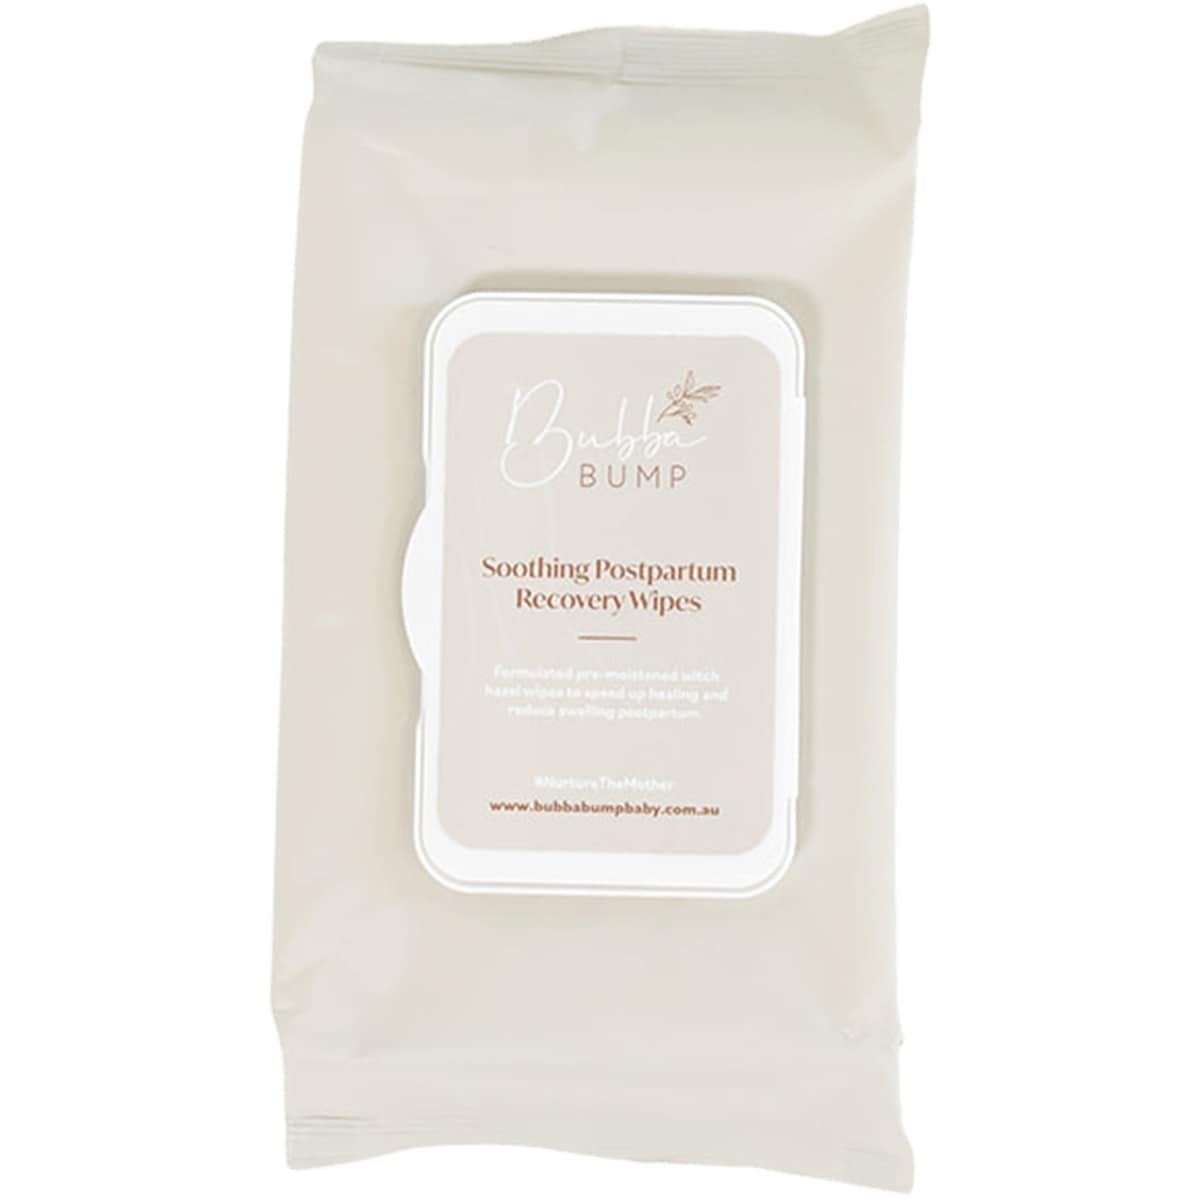 Bubba Bump Soothing Postpartum Recovery Wipes 50 Pack